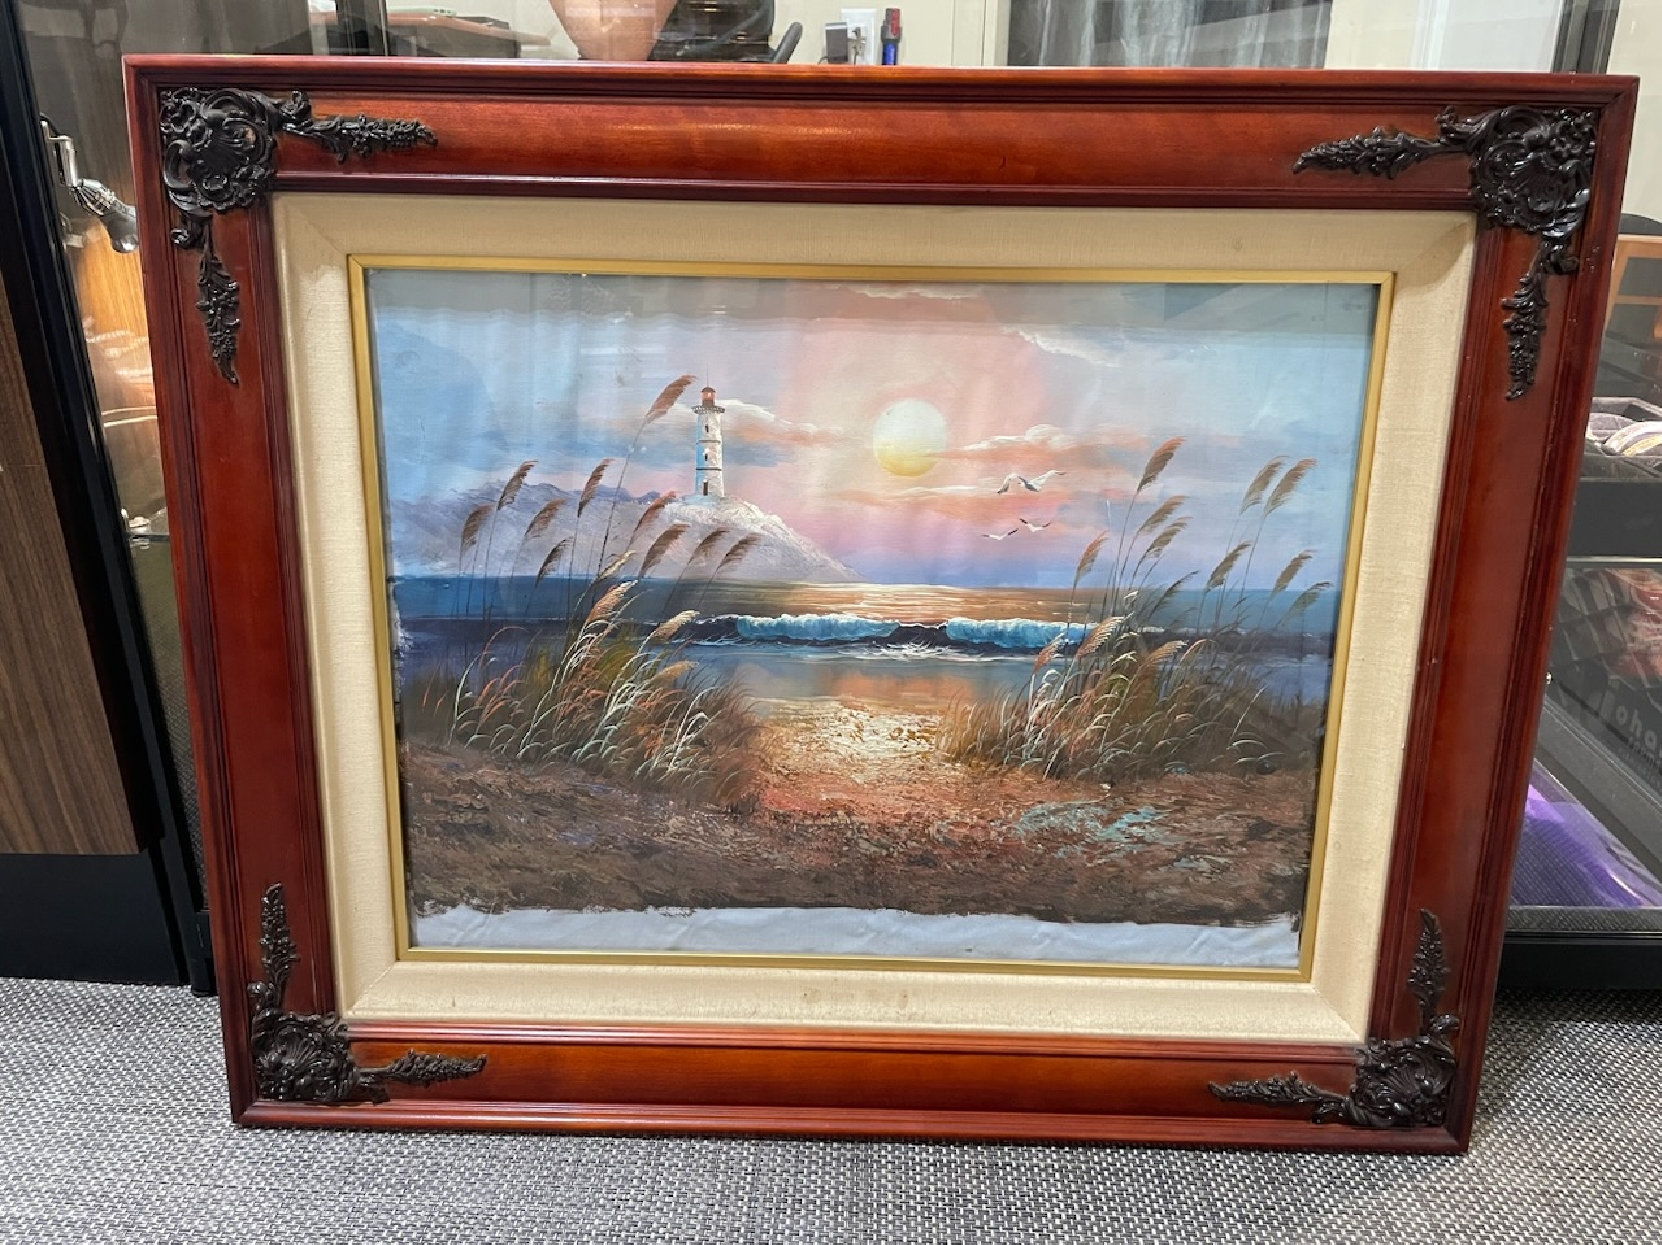 Oil Painting Of Beach and Lighthouse at Sunset in Wooden Frame